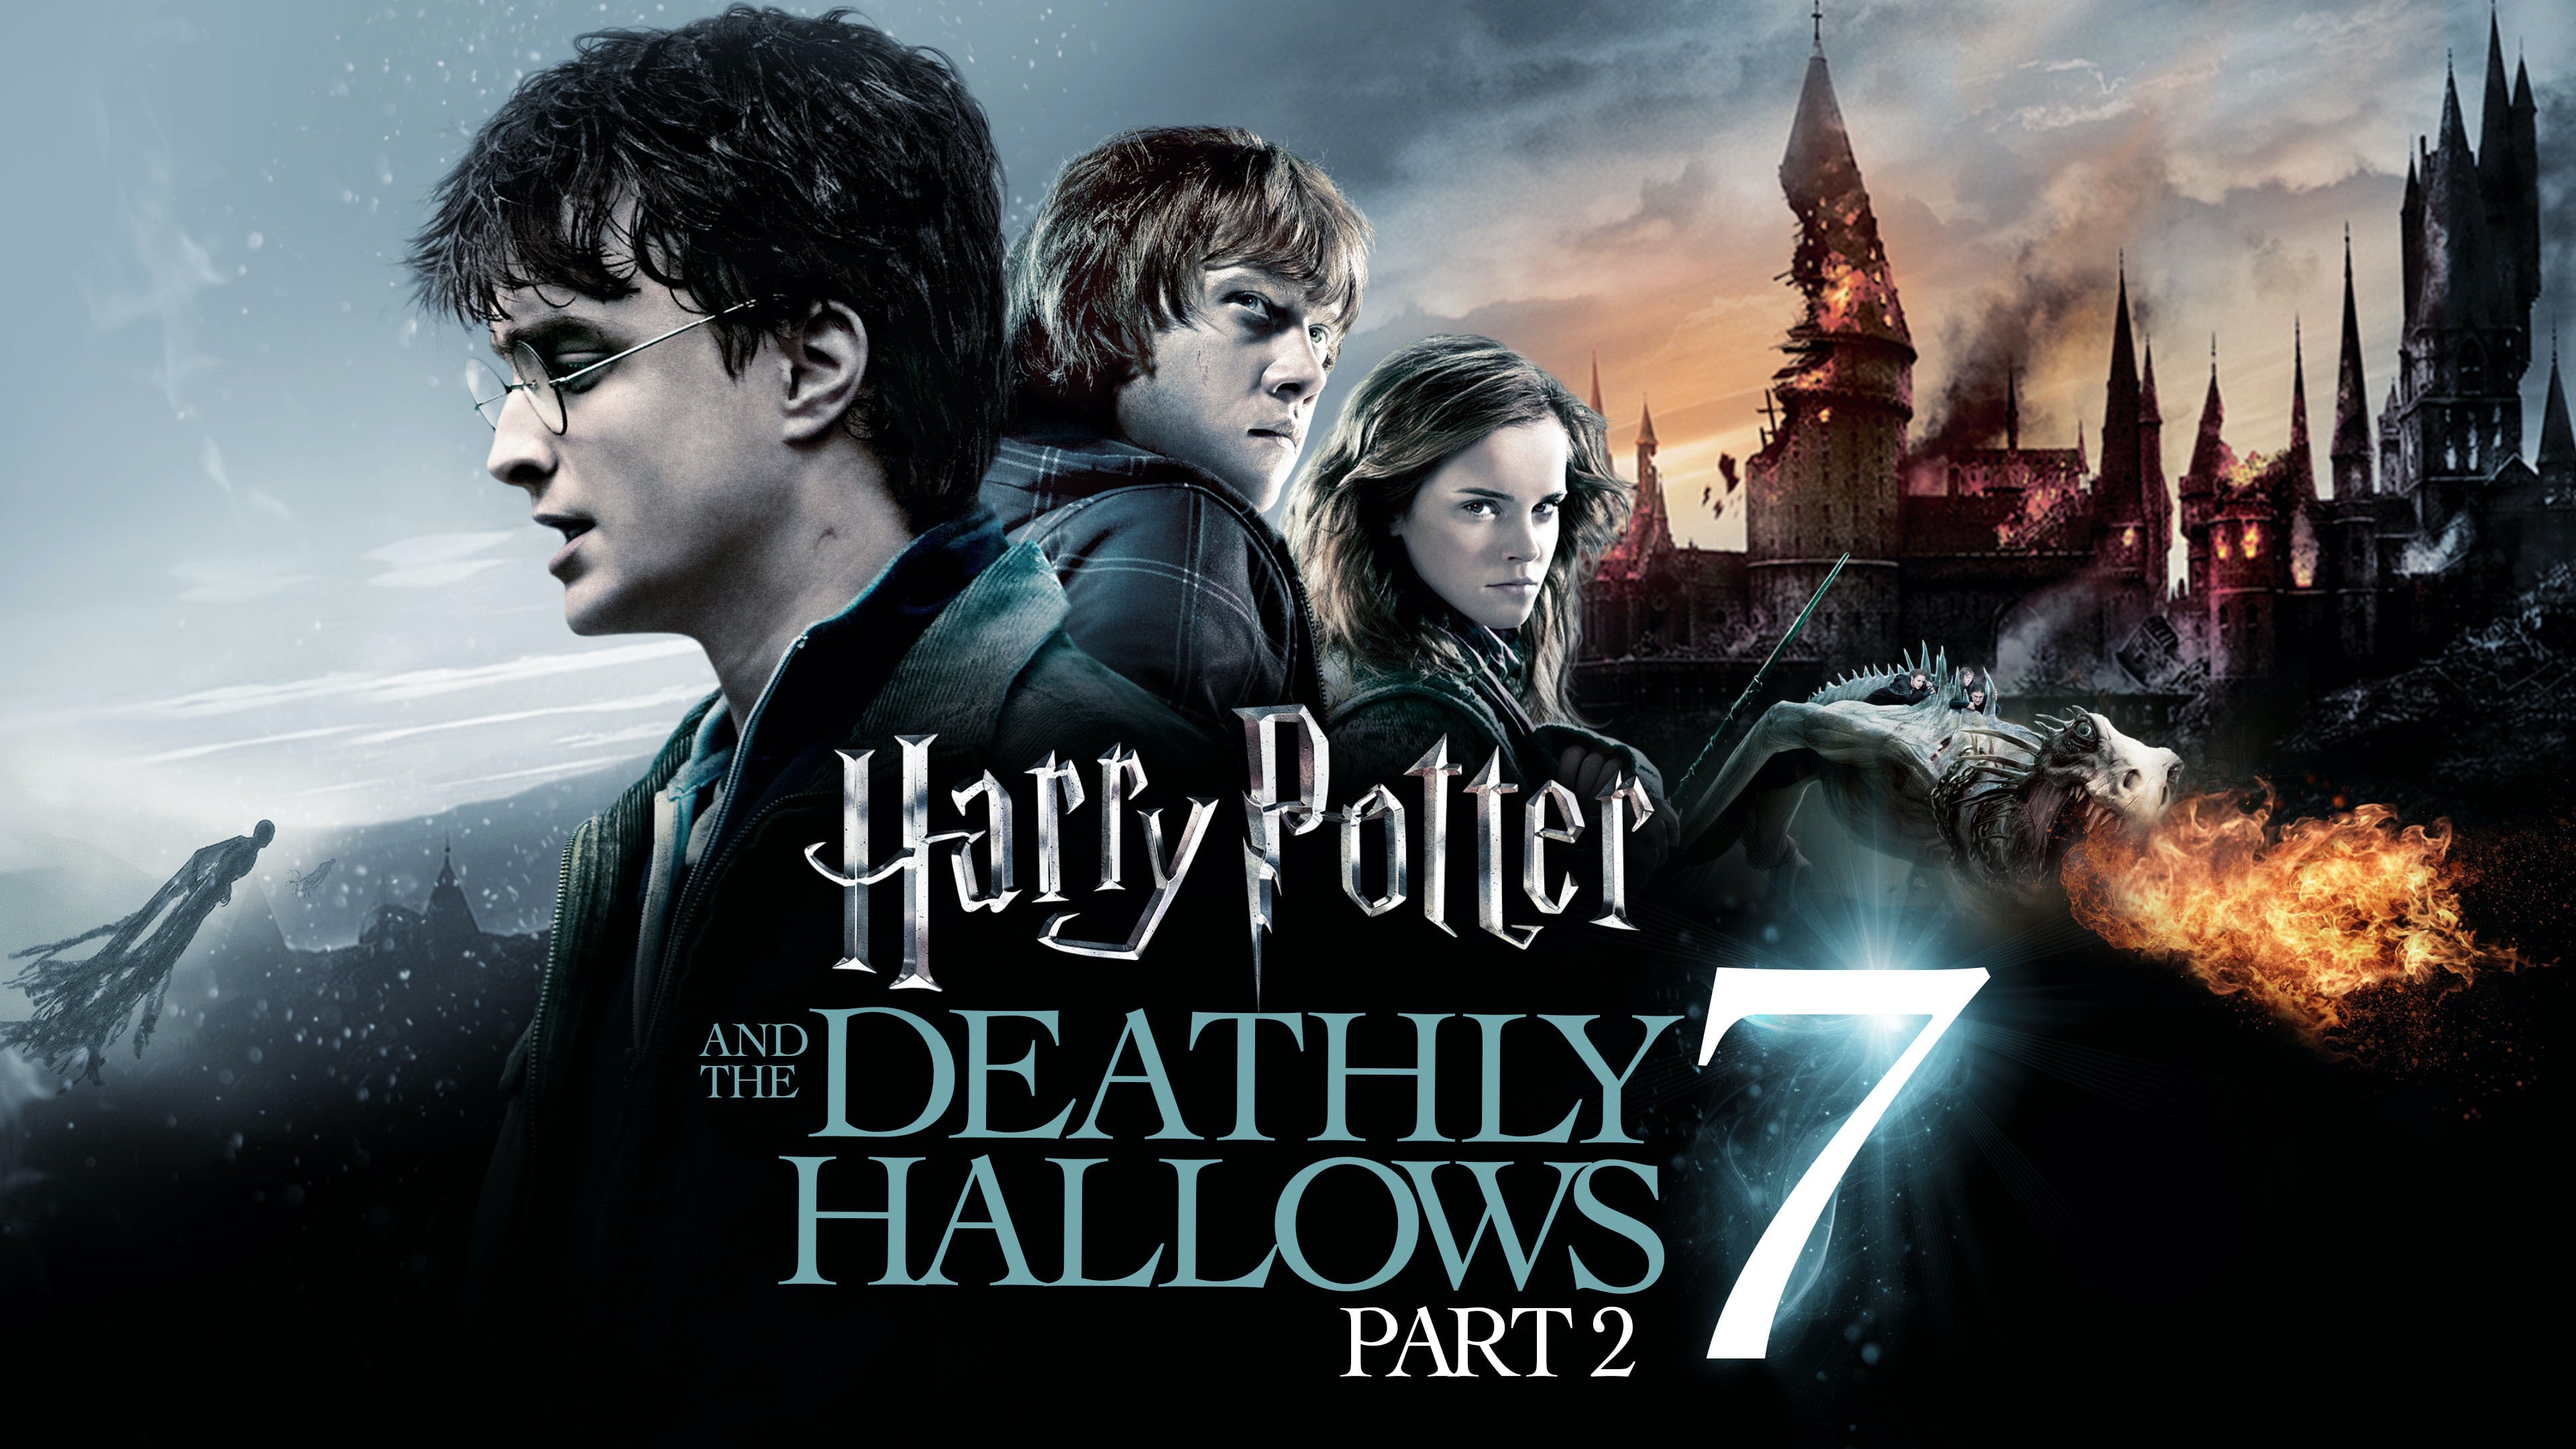 download harry potter and the deathly hallows part 2 movie